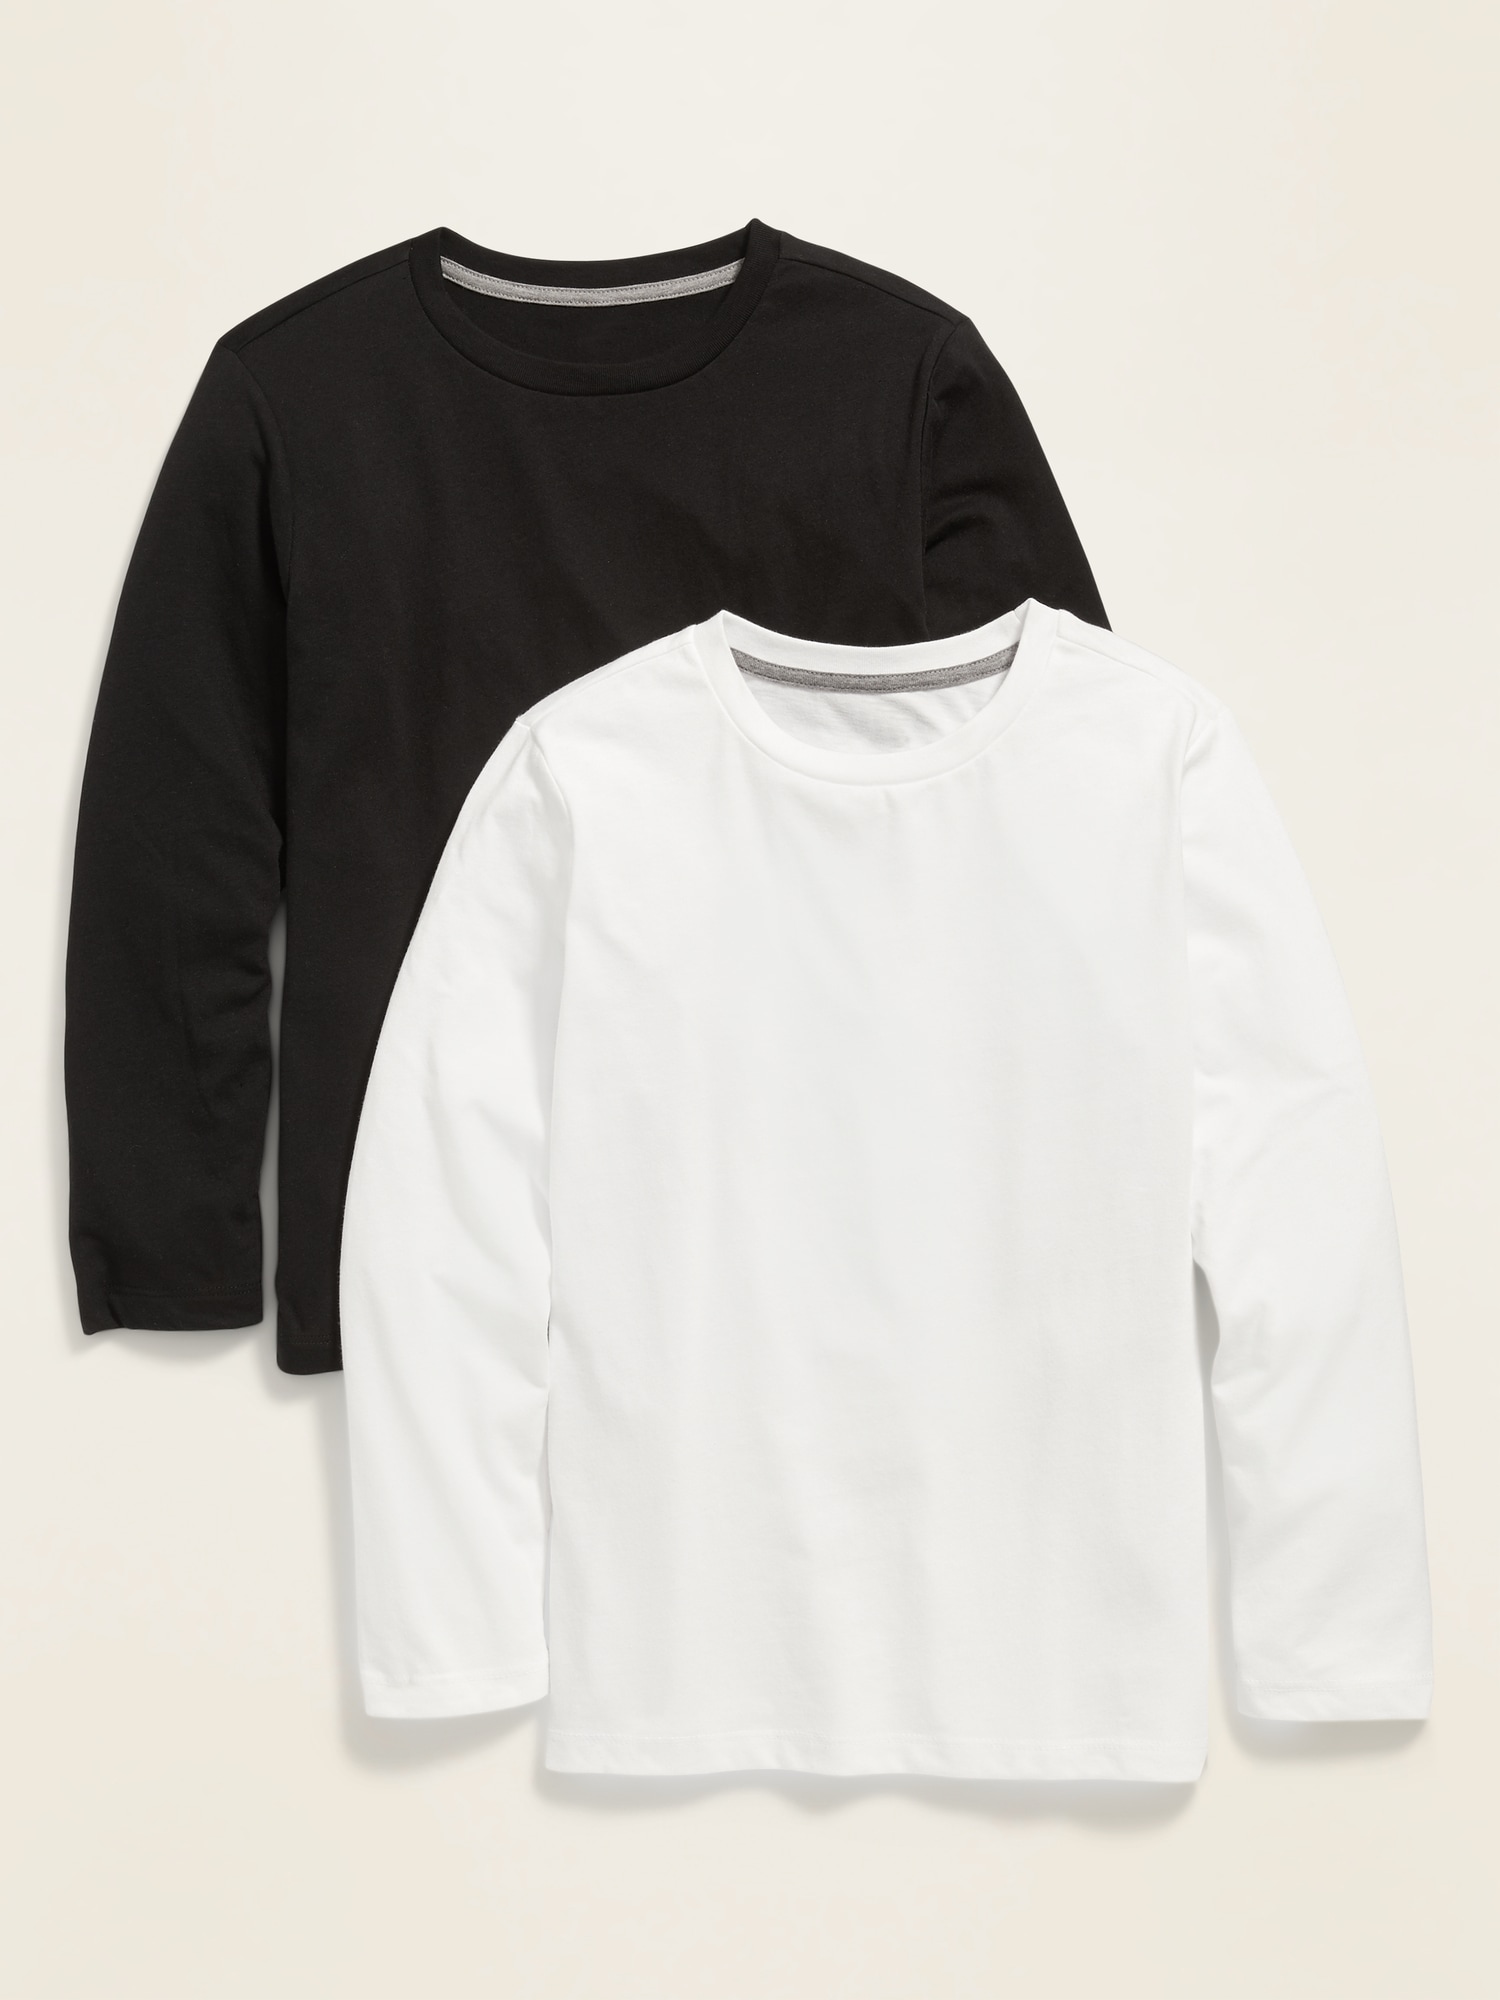 Softest Long-Sleeve Tee 2-Pack for Boys | Old Navy